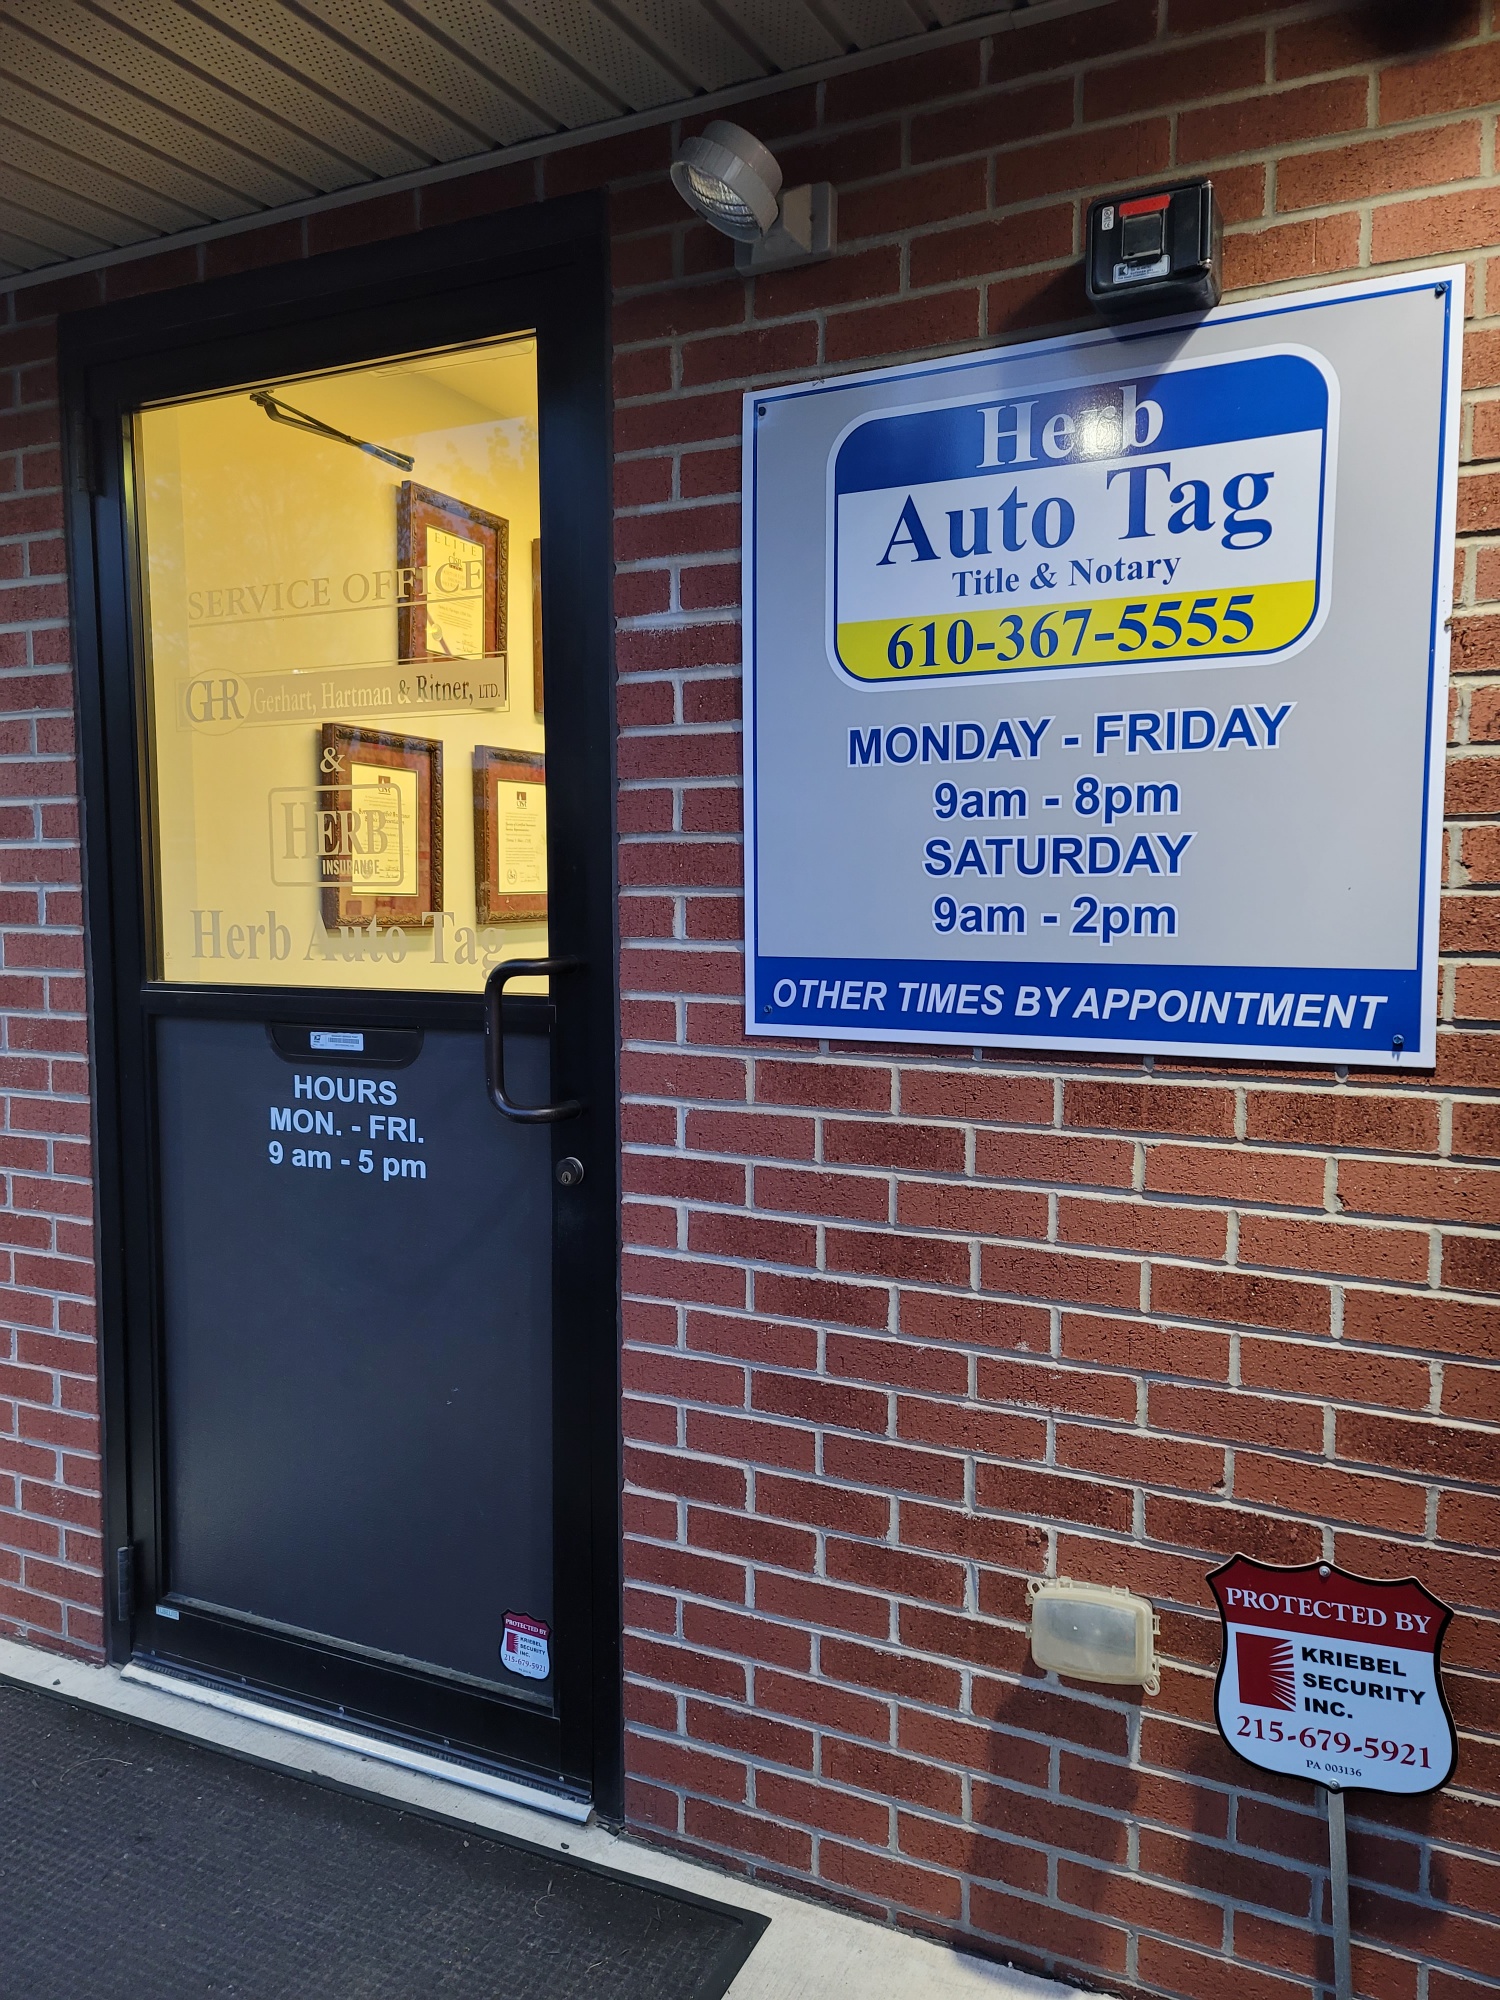 Image of Herb Auto Tag Office